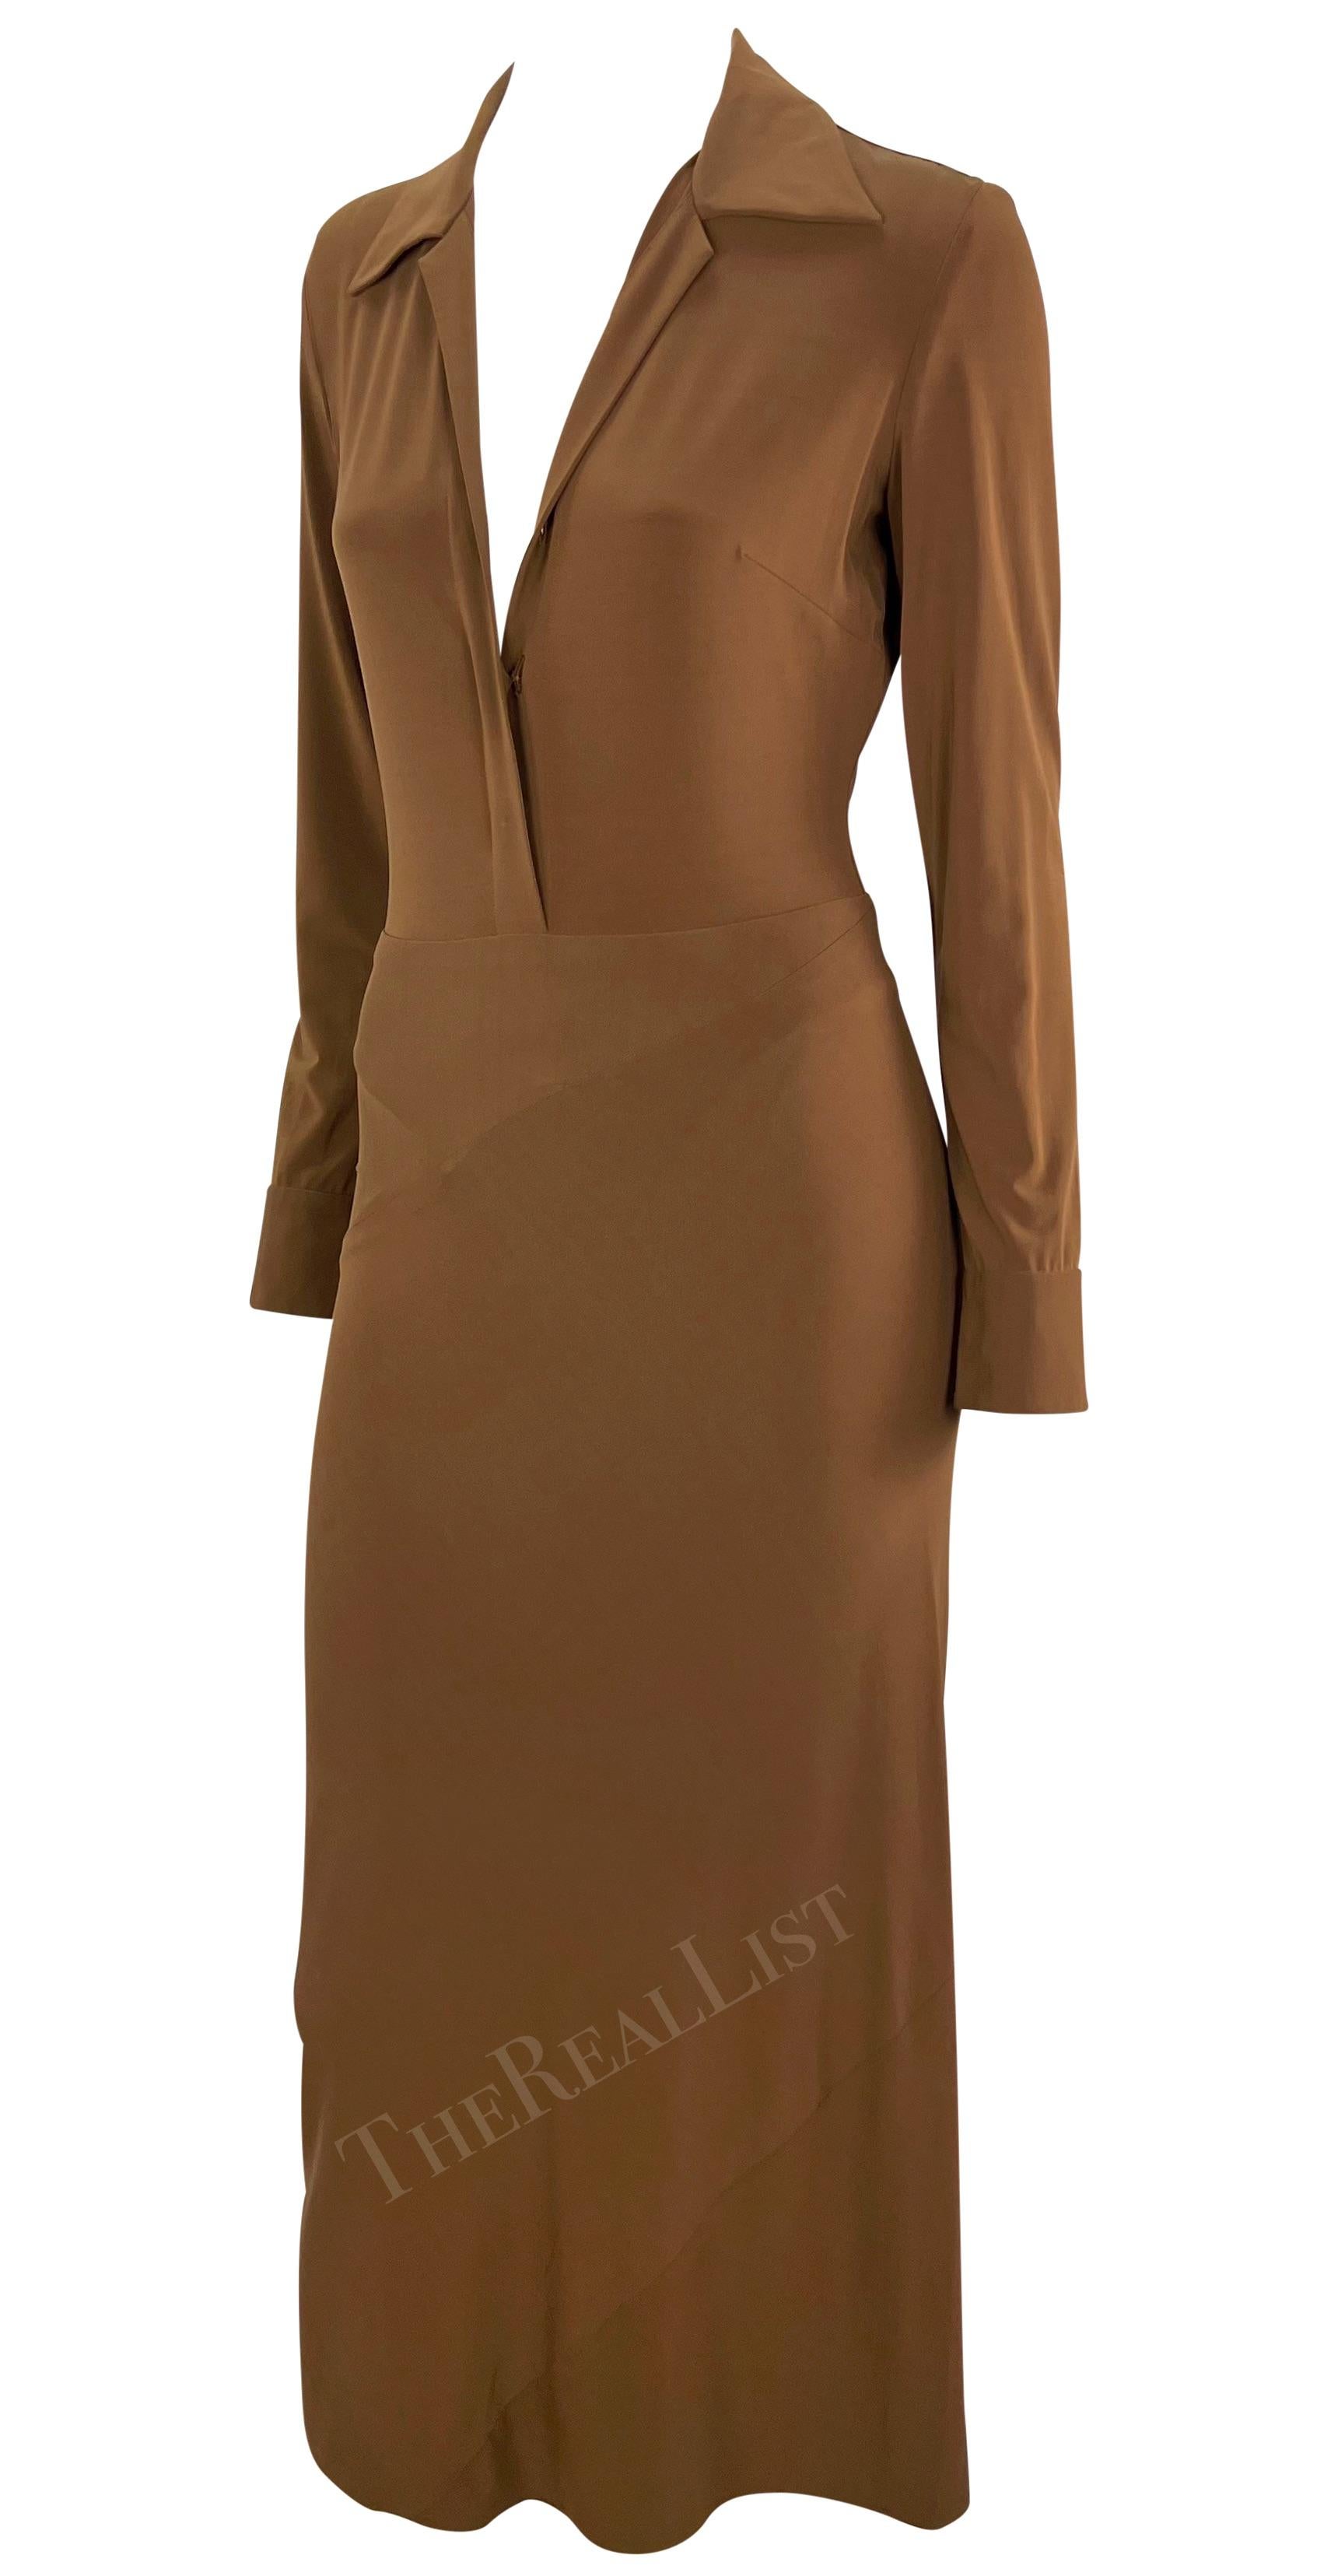 S/S 1996 Donna Karan Runway Light Brown Plunging Bodycon Dress For Sale 6